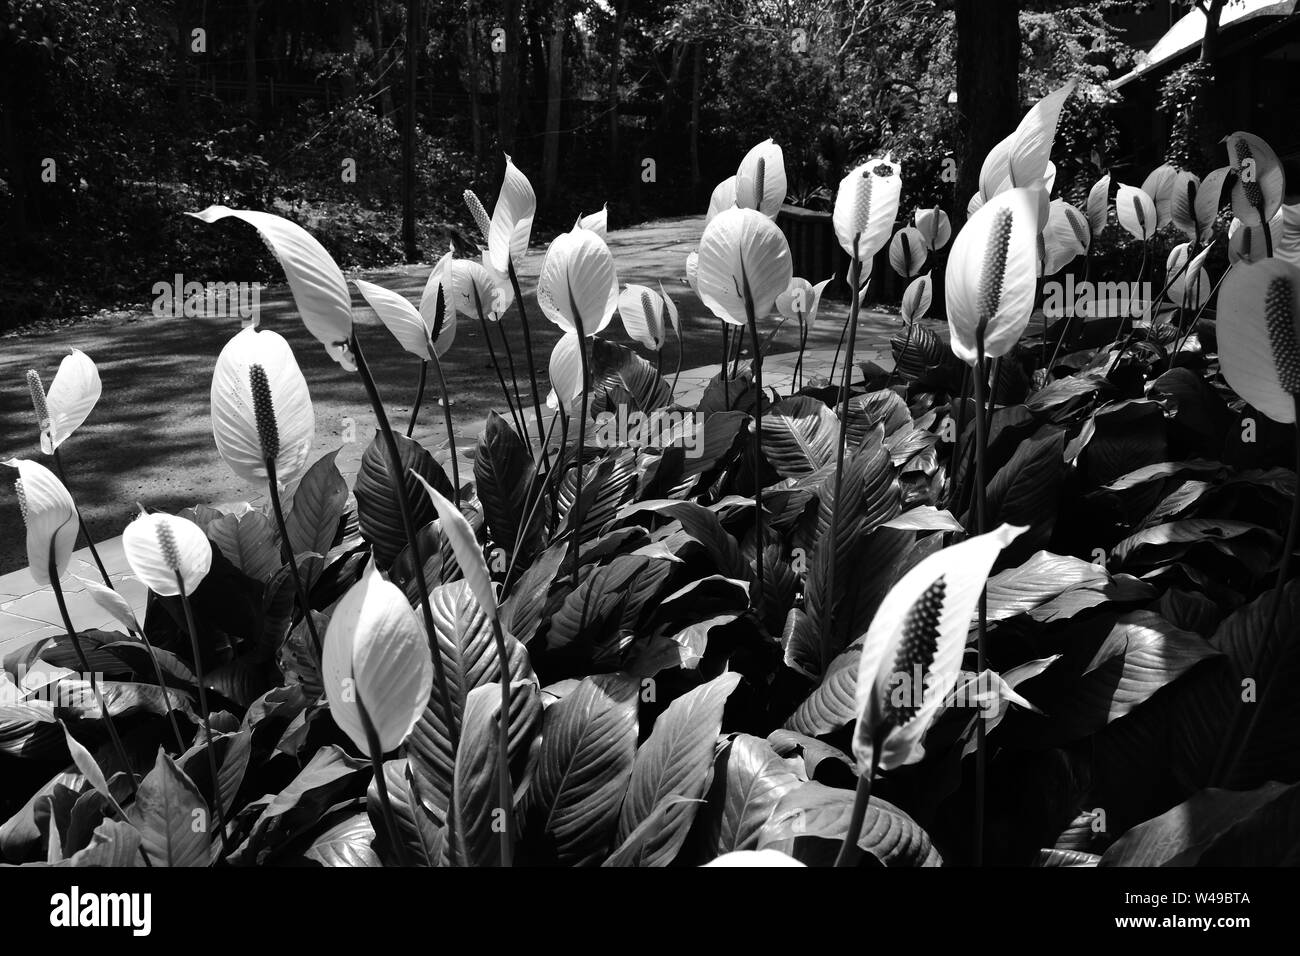 Anthurium flower bed in black and white. Stock Photo